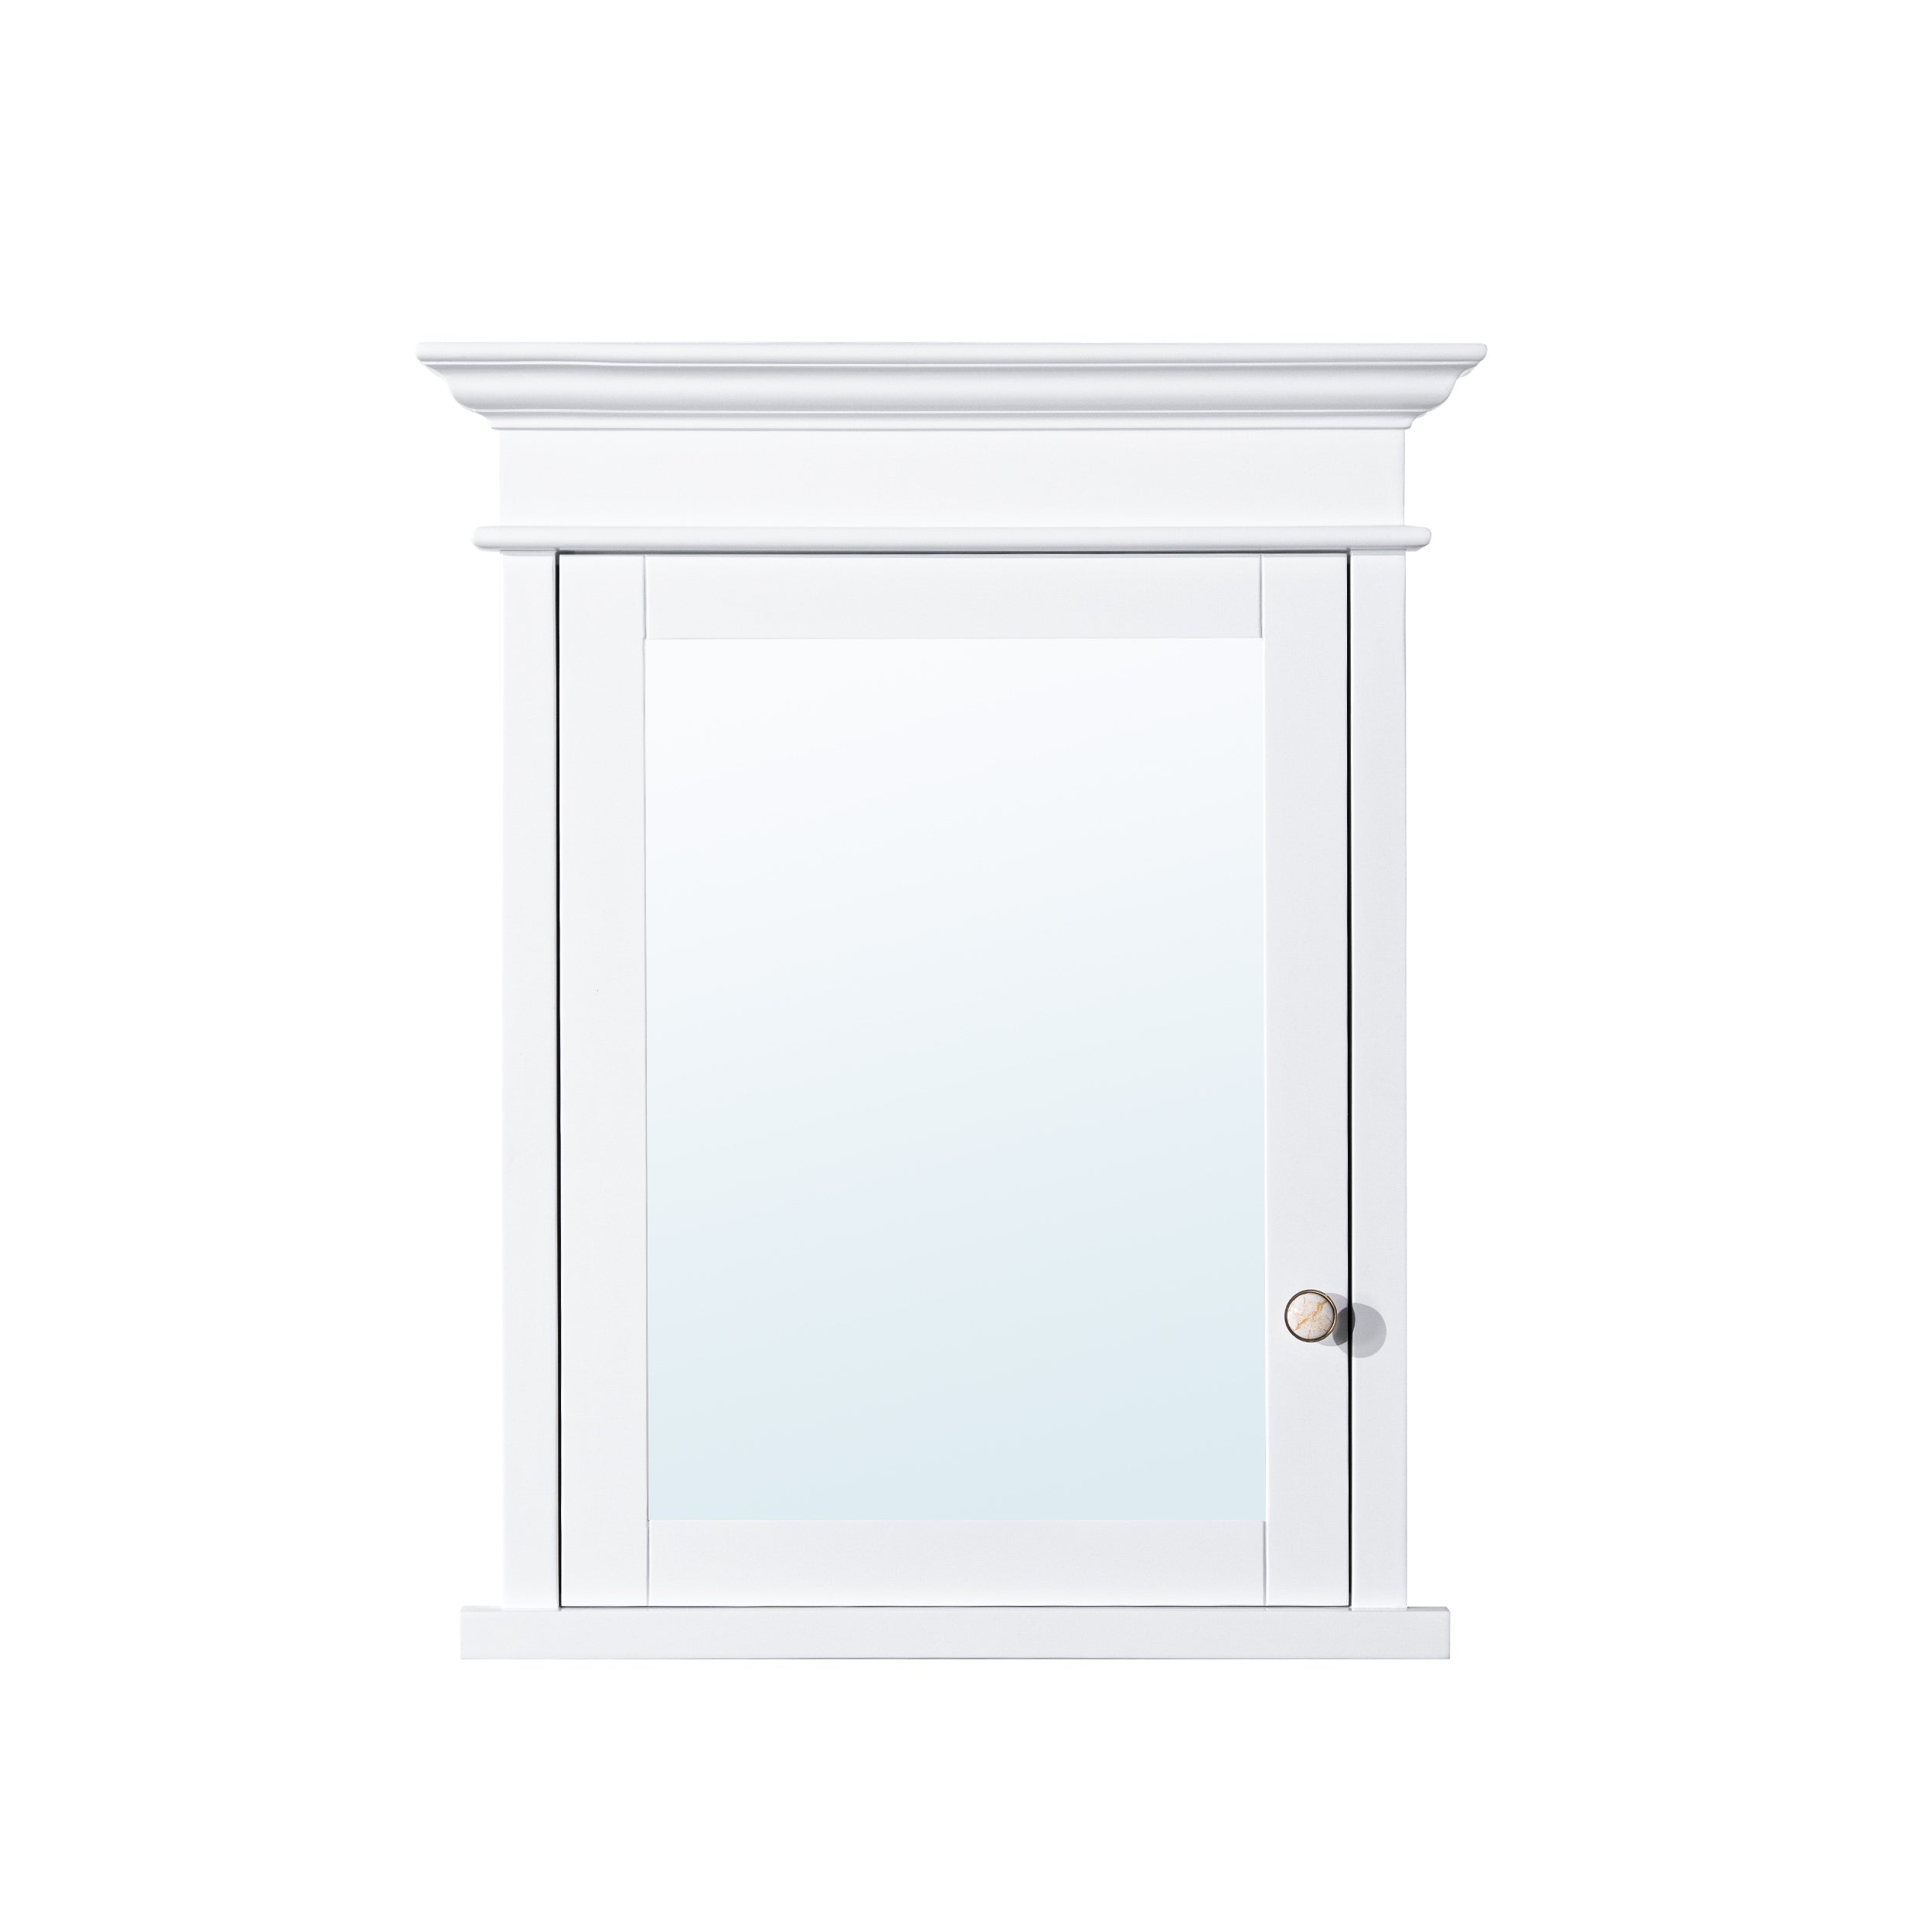 26 in.W x 32 in.H Recessed Bathroom Medicine Cabinet with Mirror in White